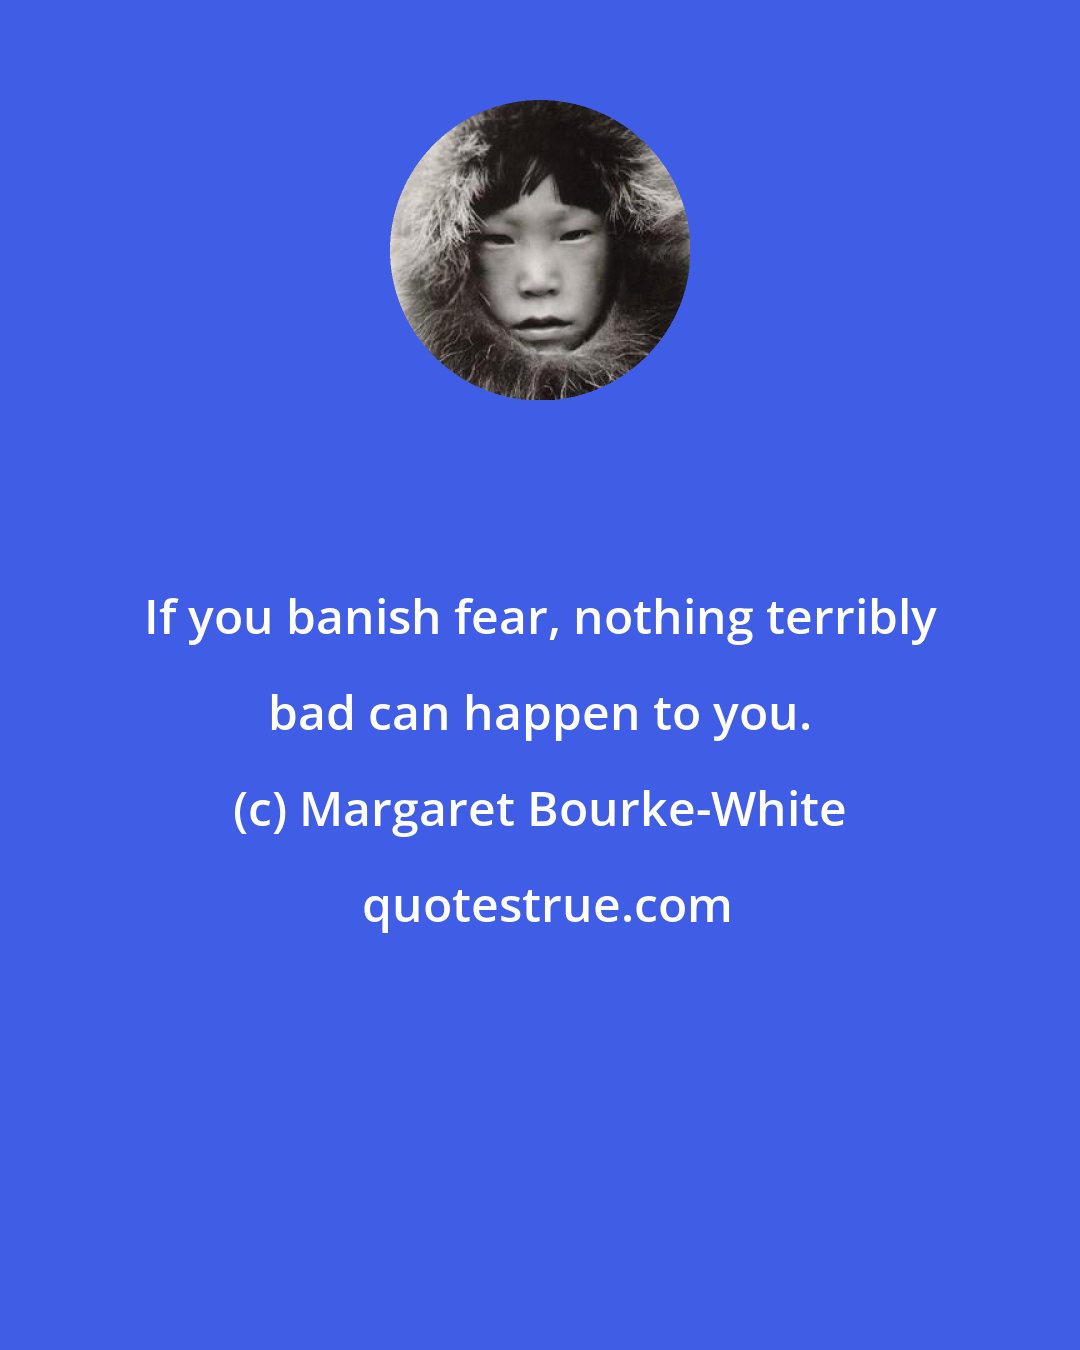 Margaret Bourke-White: If you banish fear, nothing terribly bad can happen to you.